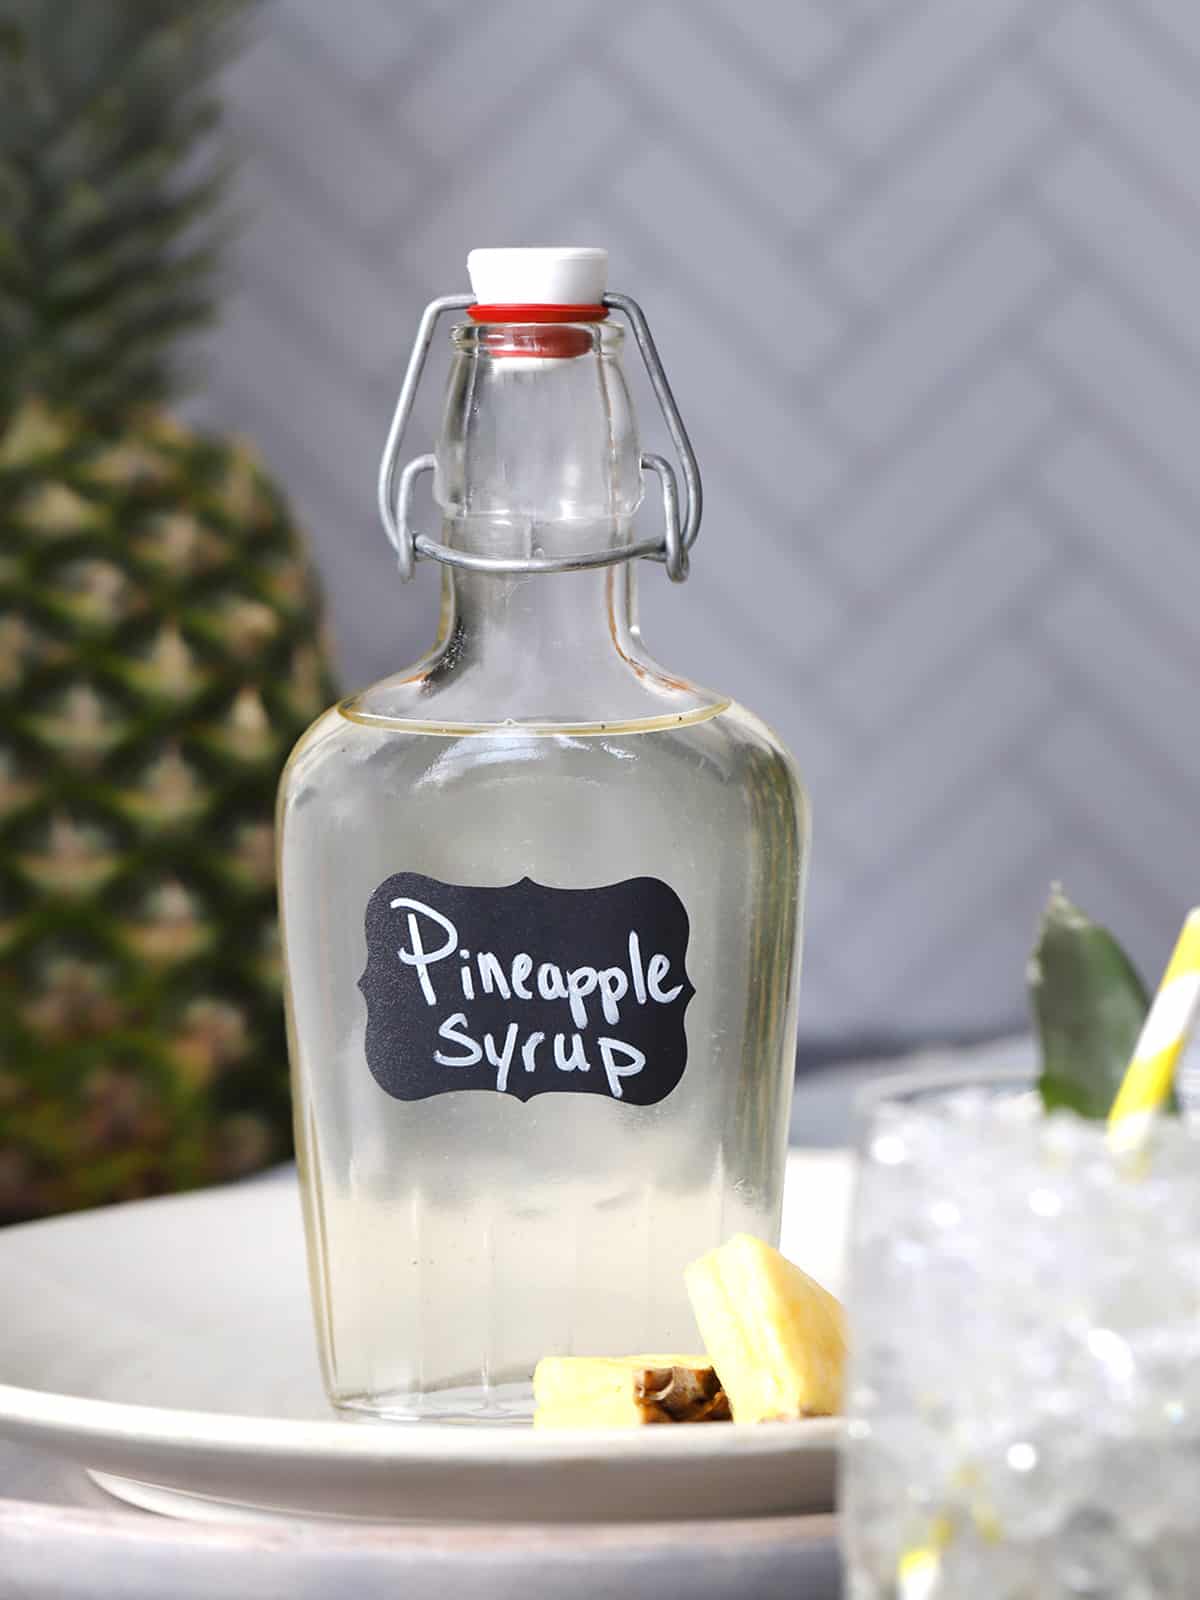 A bottle of pineapple syrup.